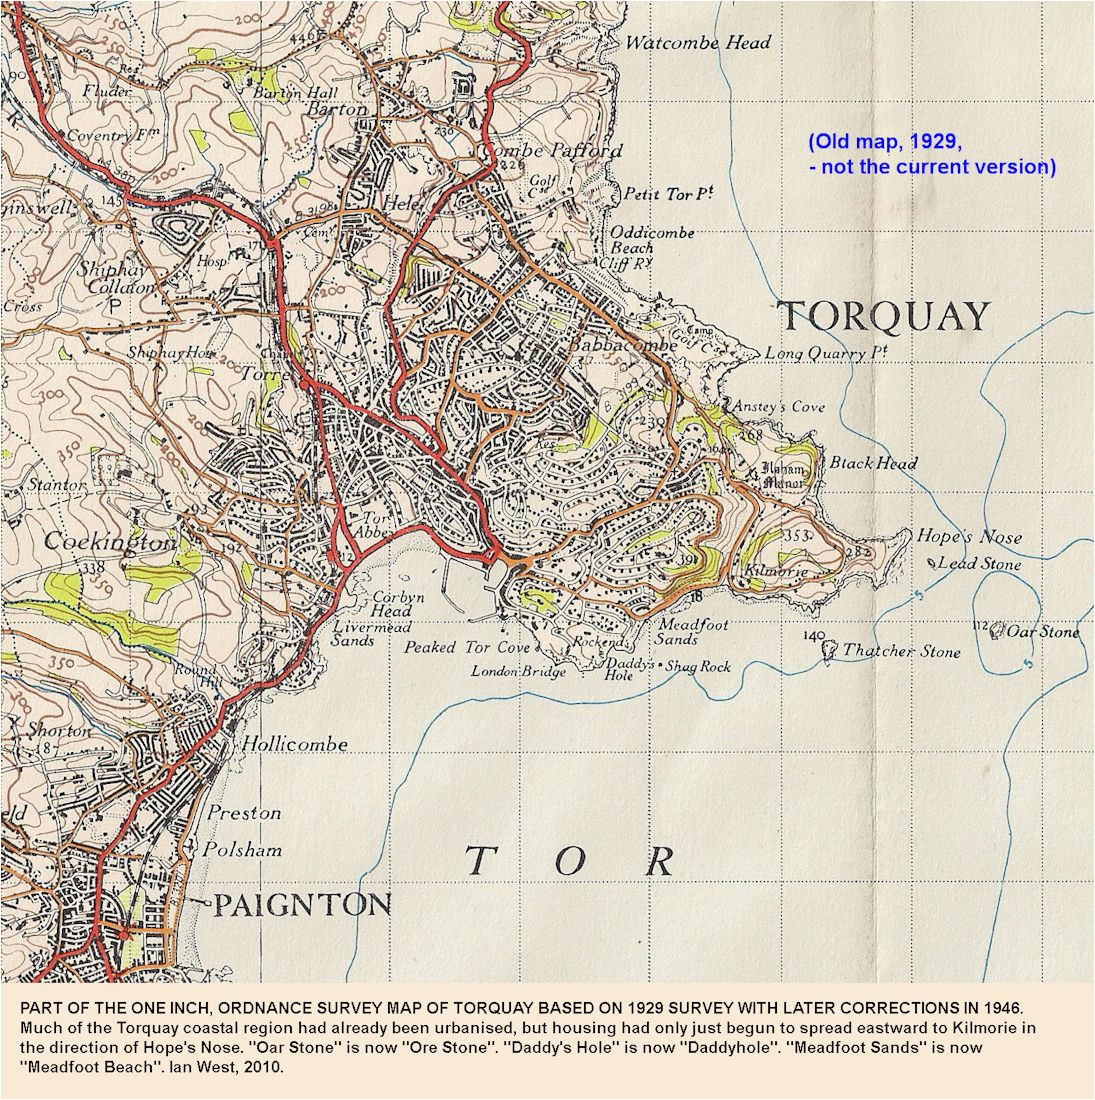 Map Of south West England torquay Geological Field Guide by Ian West